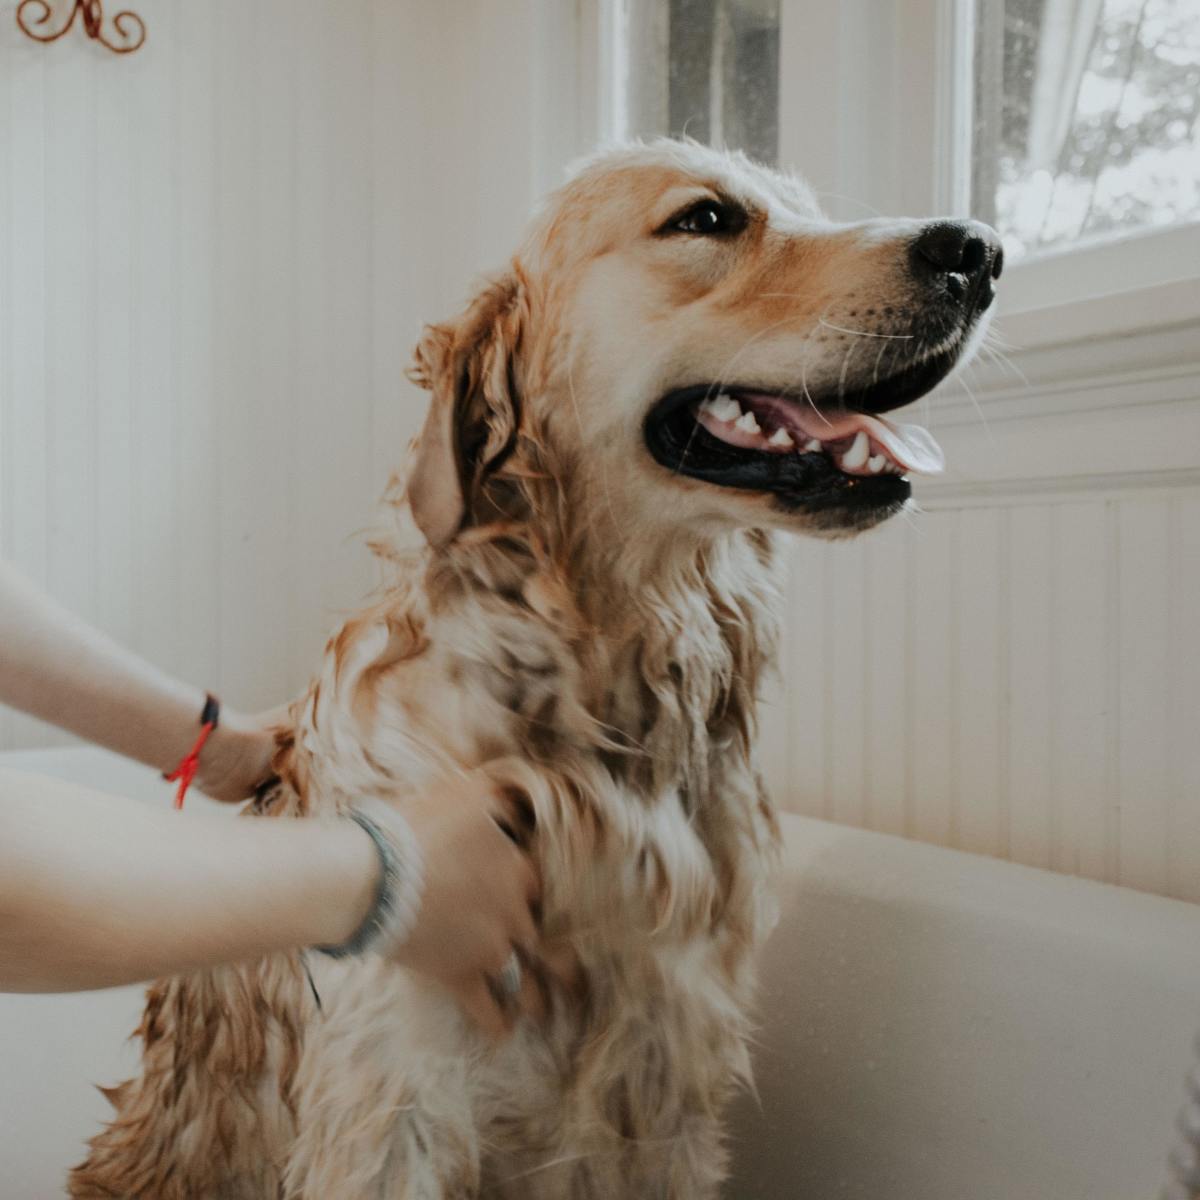 Medicated baths can be extremely effective for dogs with skin conditions, but only when done right.